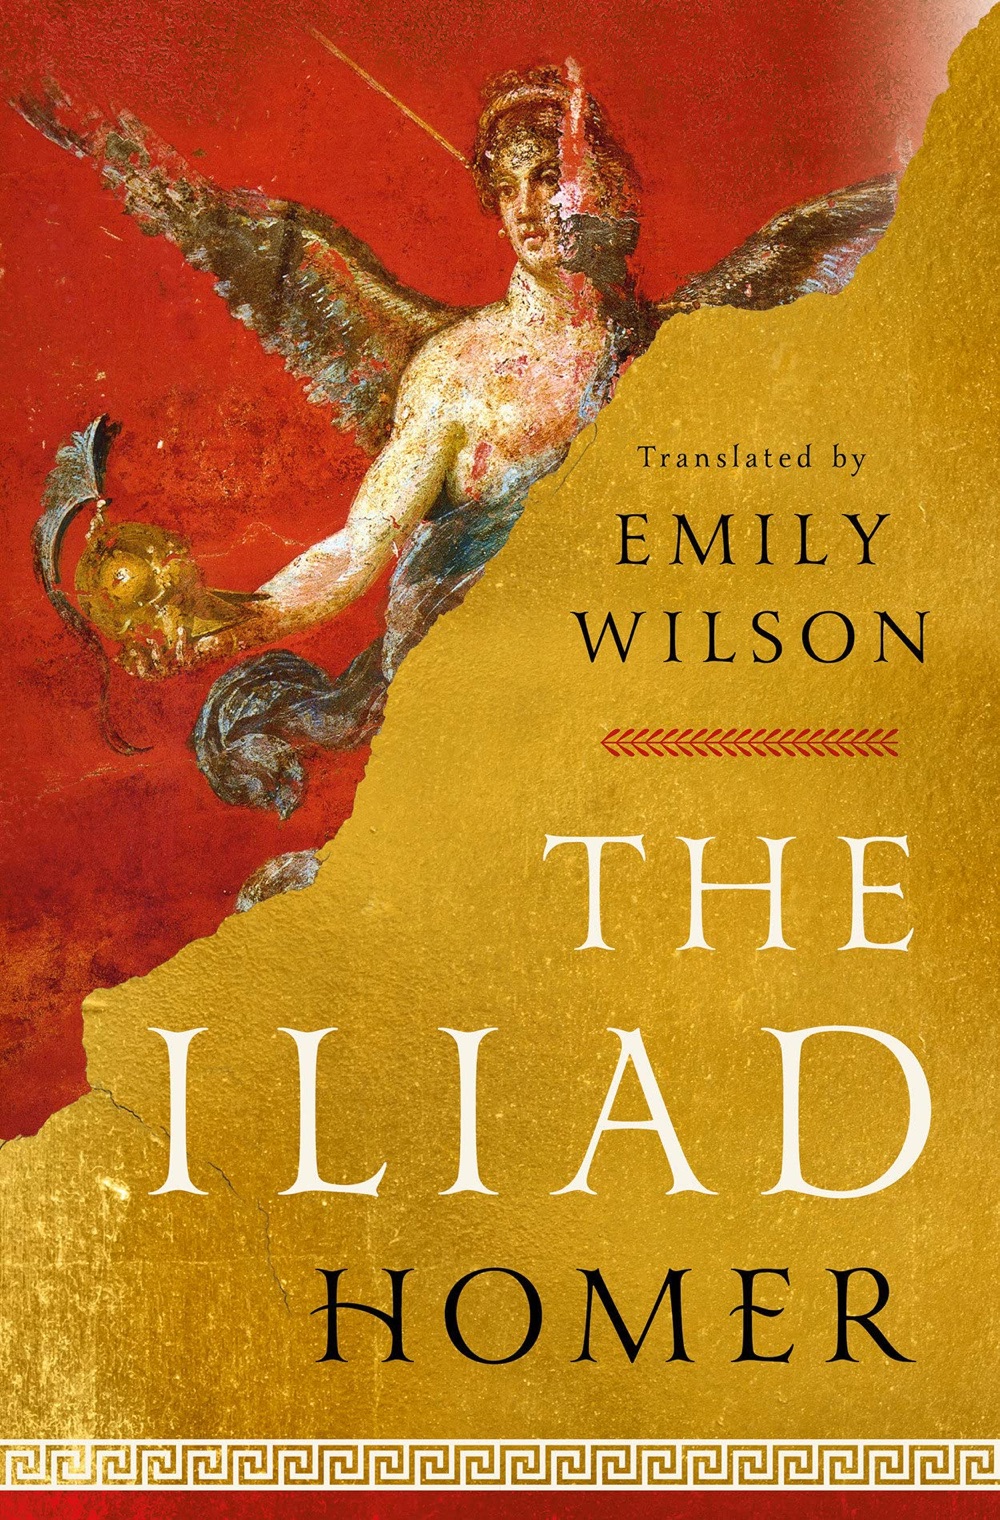 the book cover for Emily Wilson's translation of Homer's The Iliad 